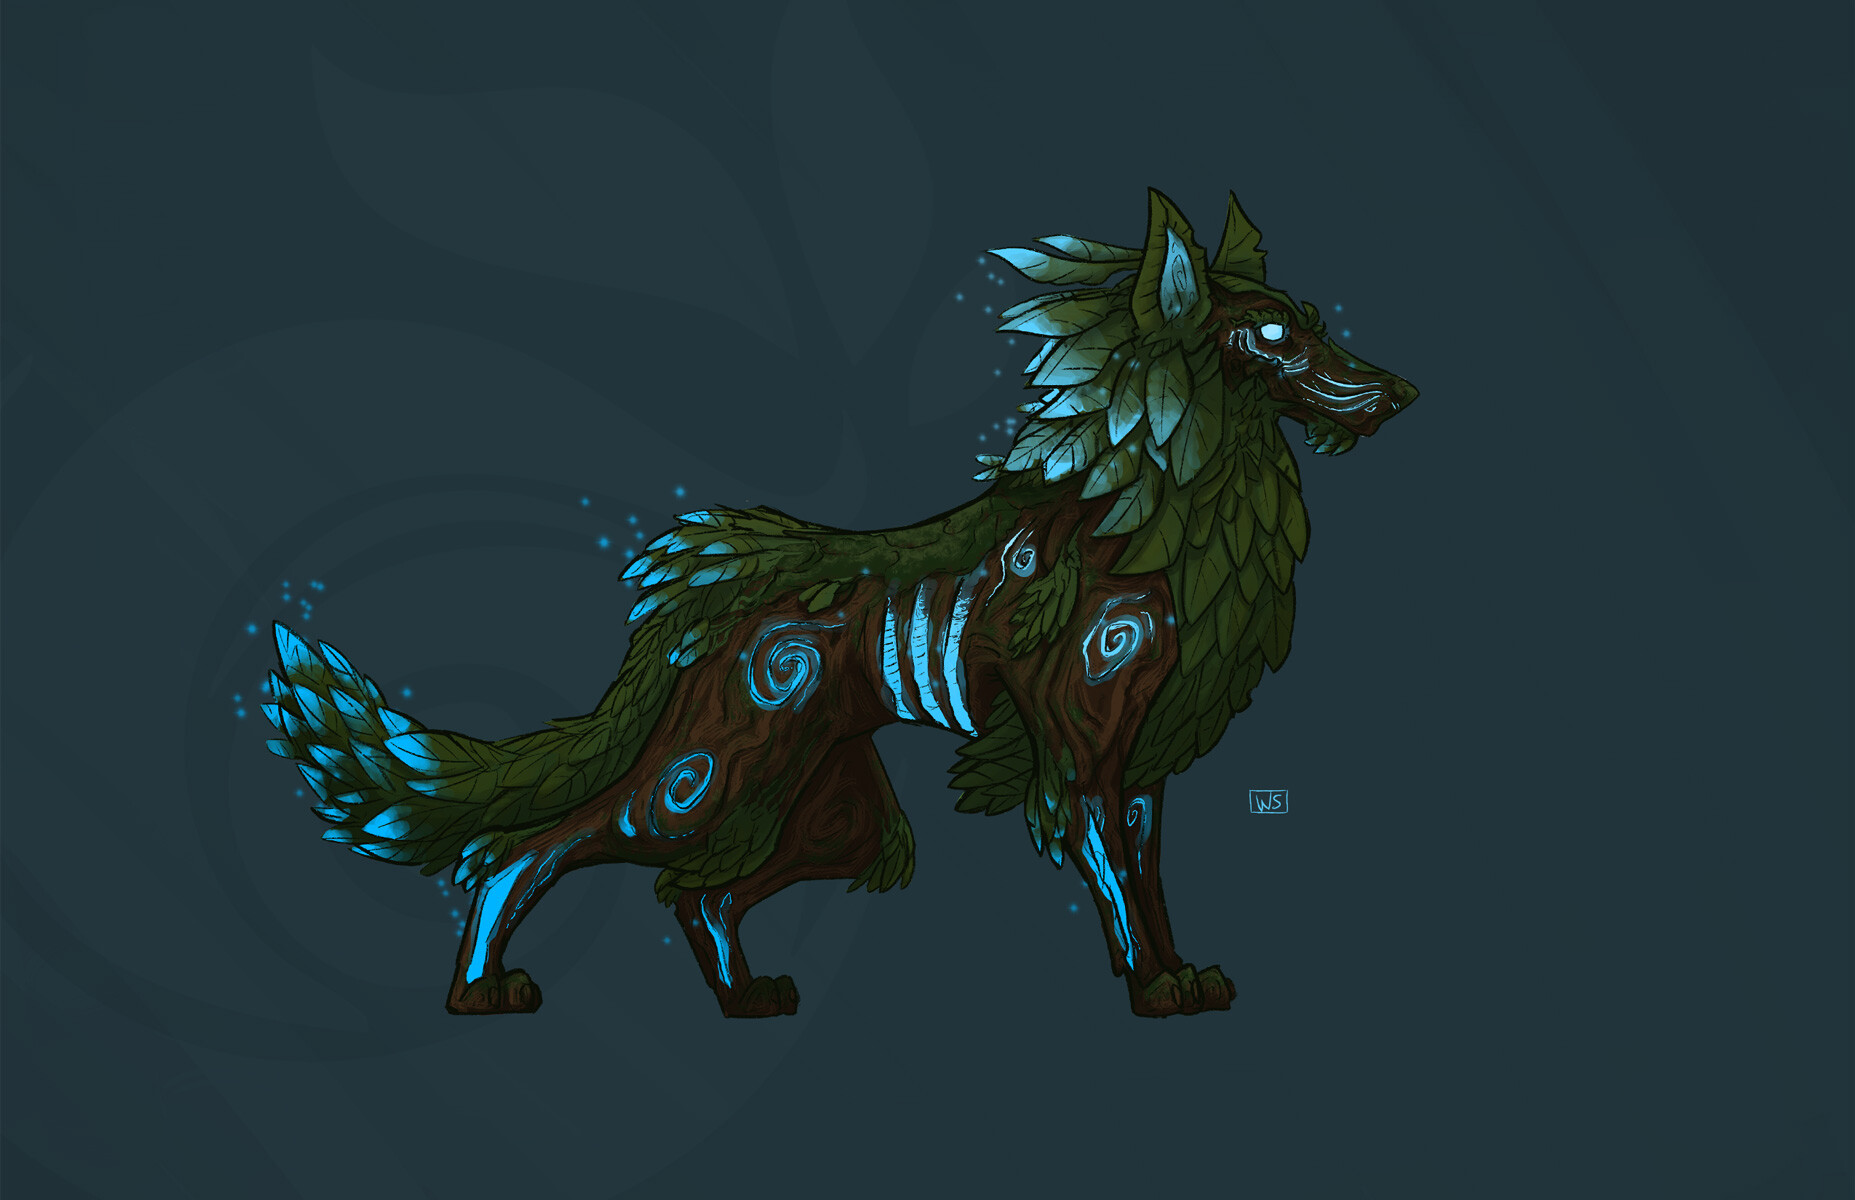 An example of a supernatural hound from some plane. This species uses a form of naturatheurgic influence for enhanced durability and camouflage.